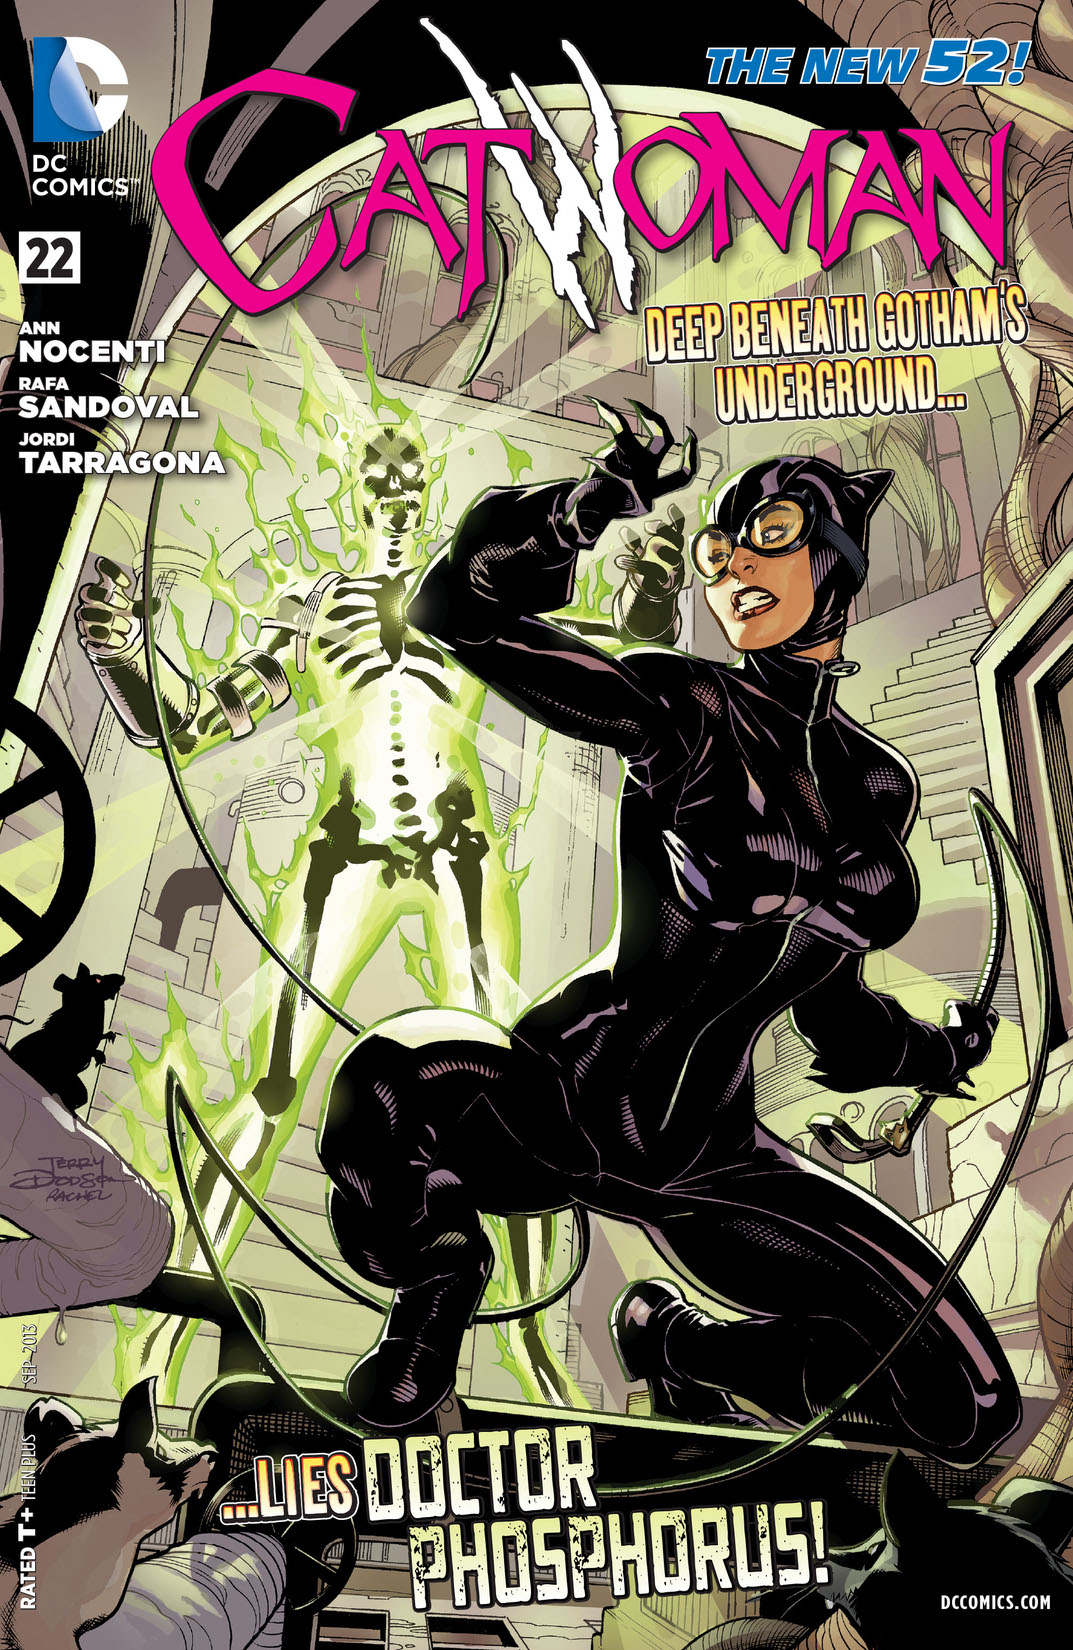 Catwoman (2011-) #22 preview images